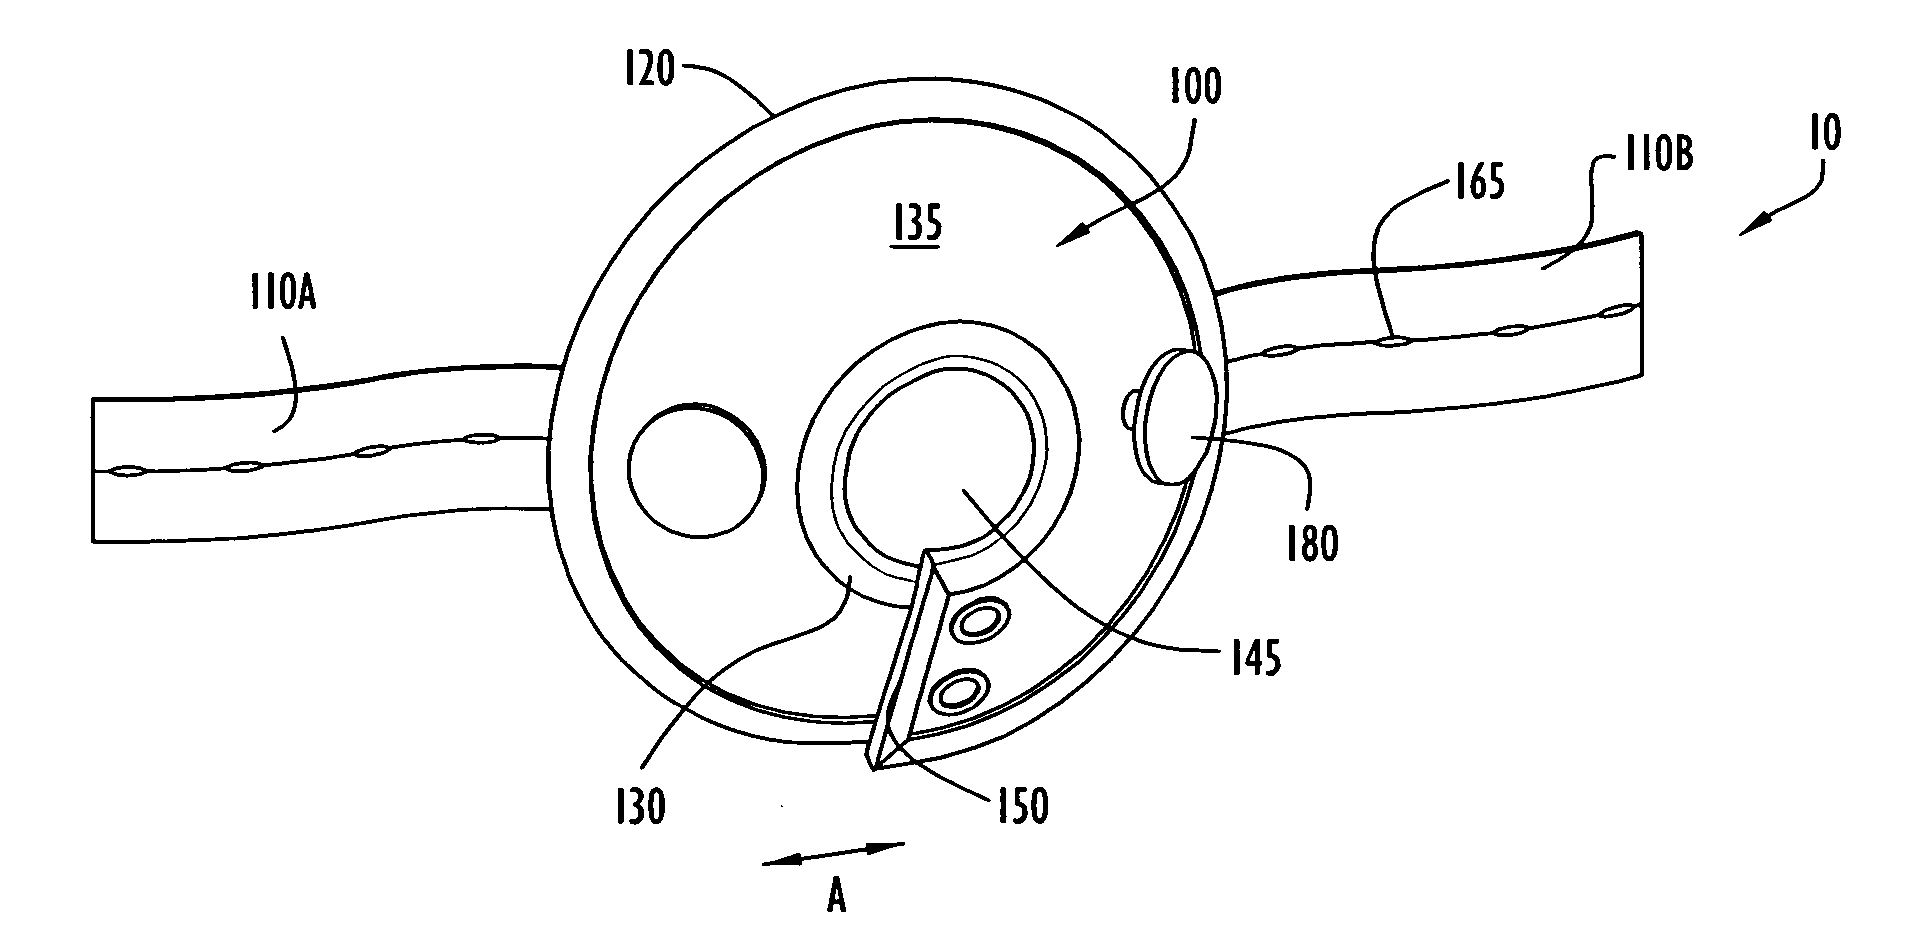 Support device for a breast pump